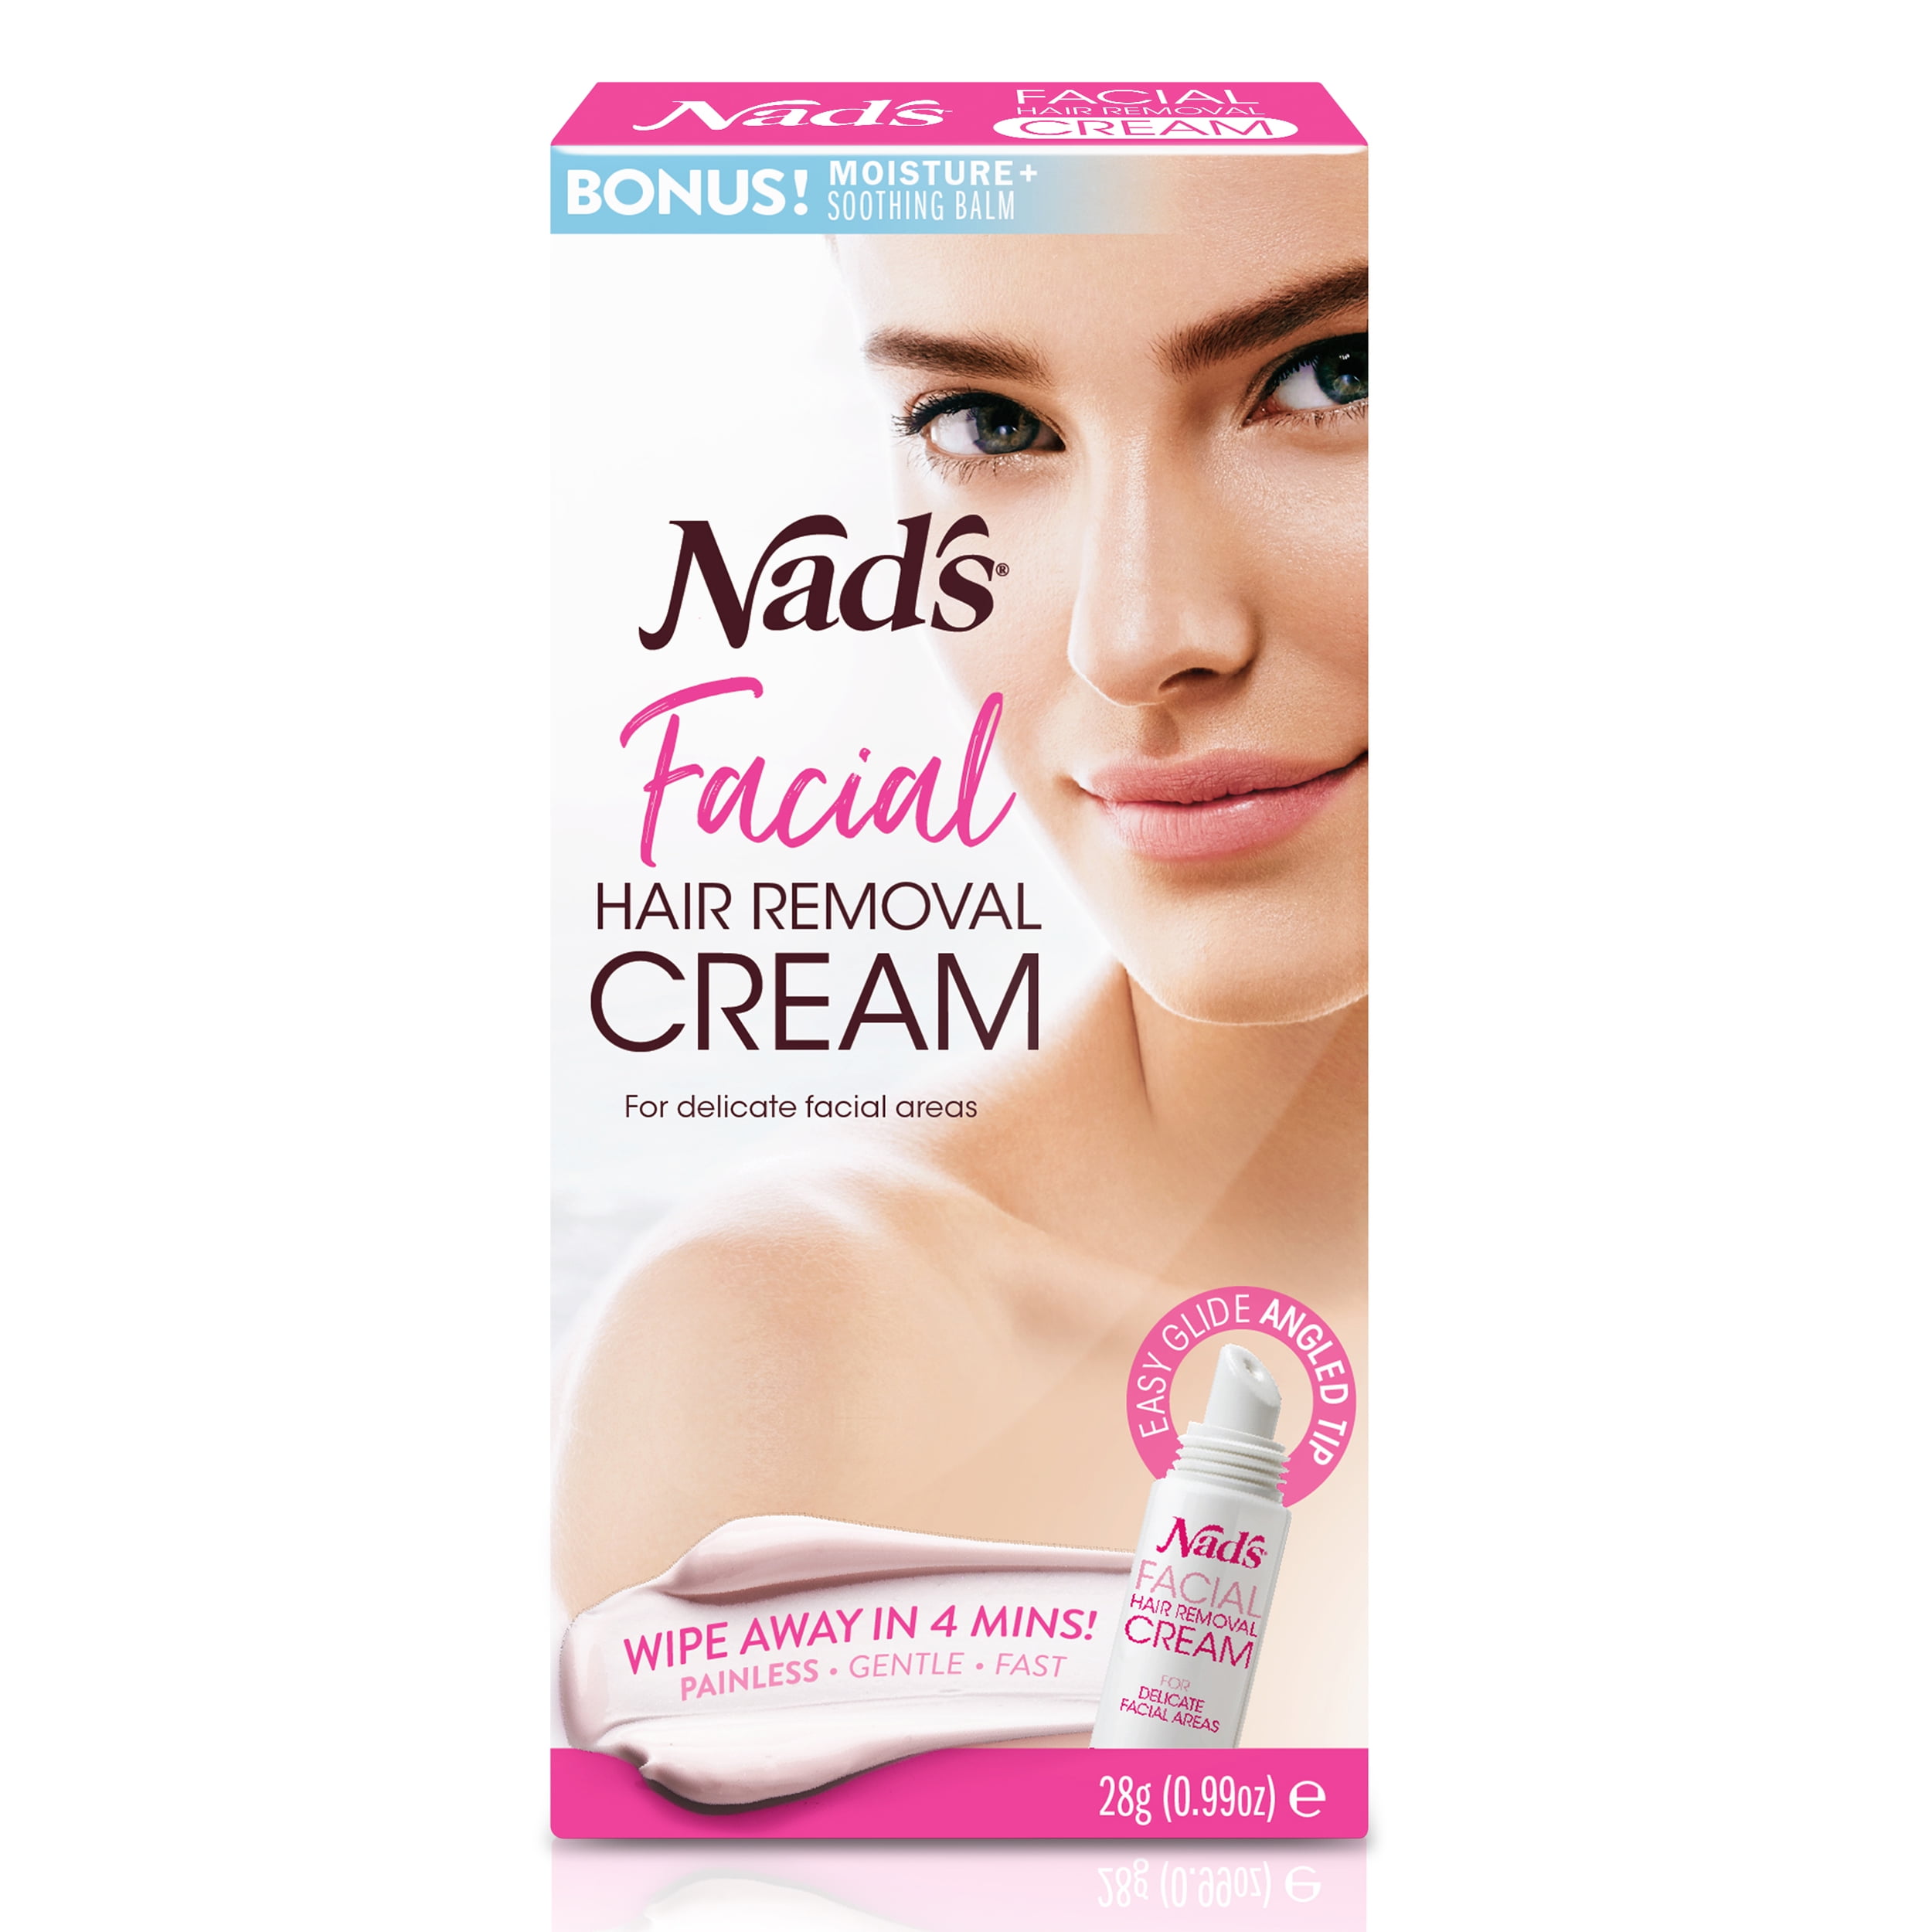 Nad's Facial Hair Removal Cream for Painless Hair Removal, Sensitive Skin -  